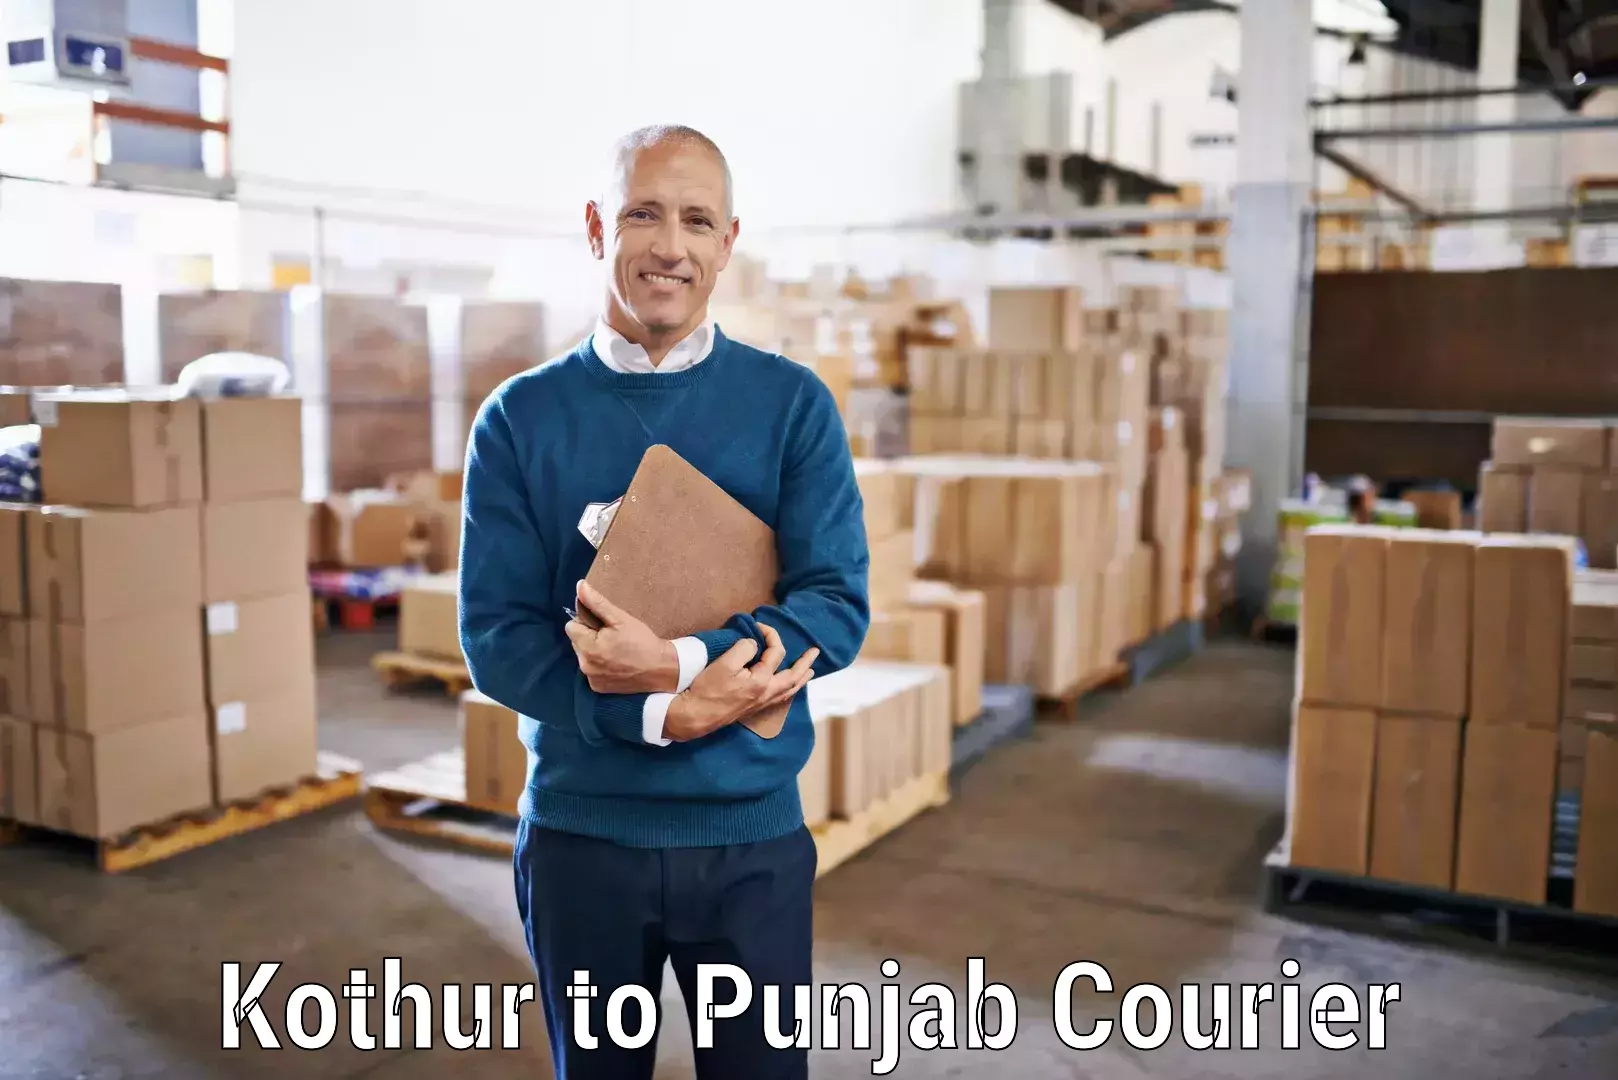 Round-the-clock parcel delivery Kothur to Nawanshahr